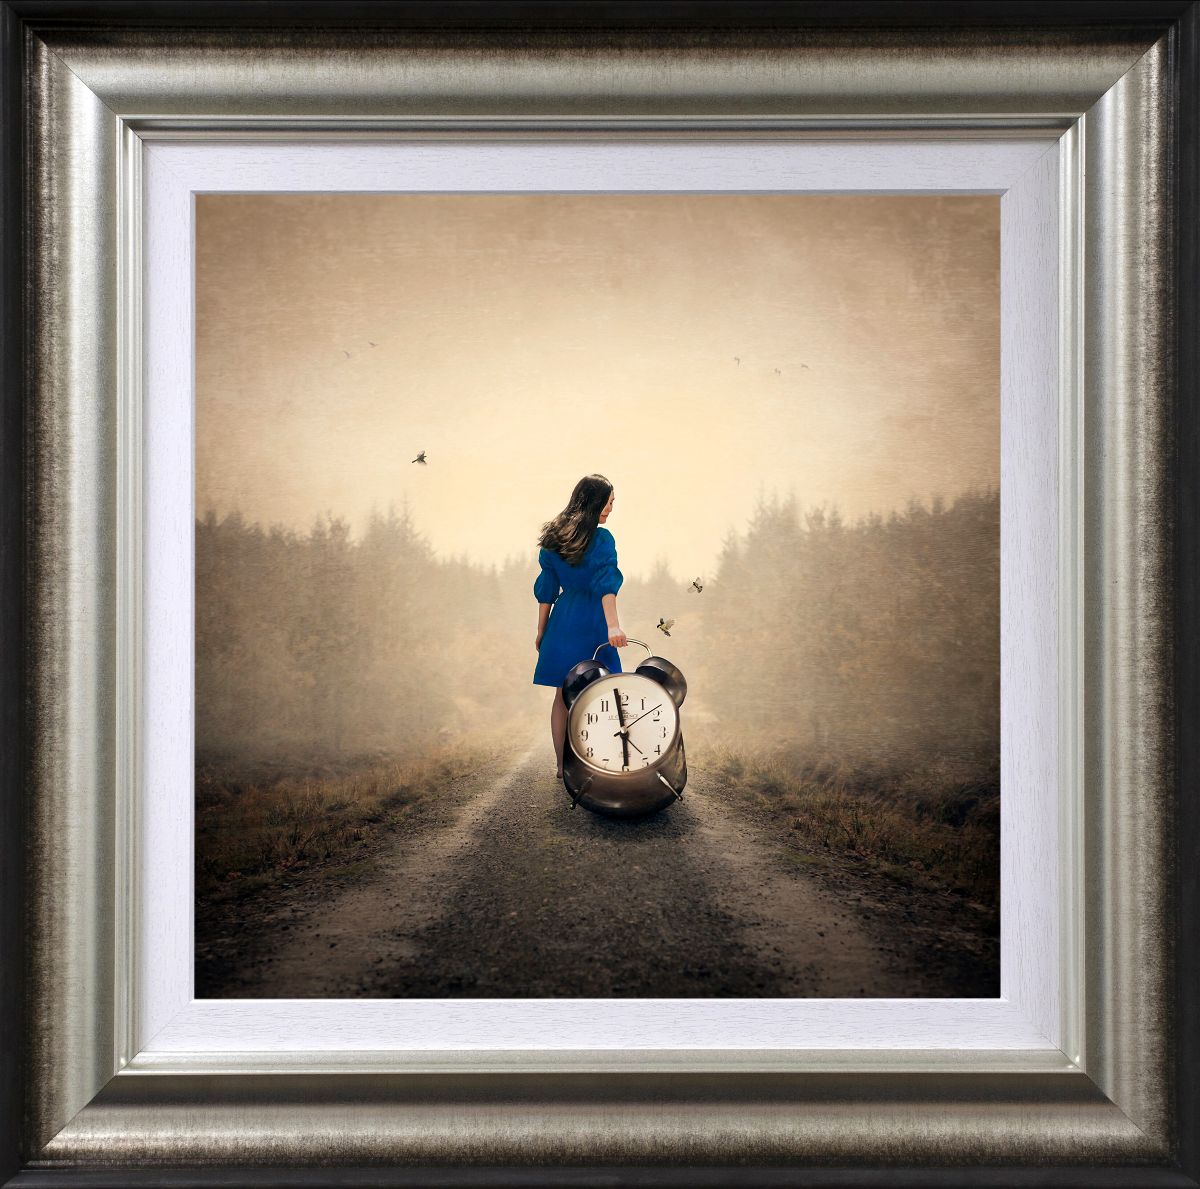 Michelle Mackie - 'Holding On To Every Minute' - Framed Limited Edition Art